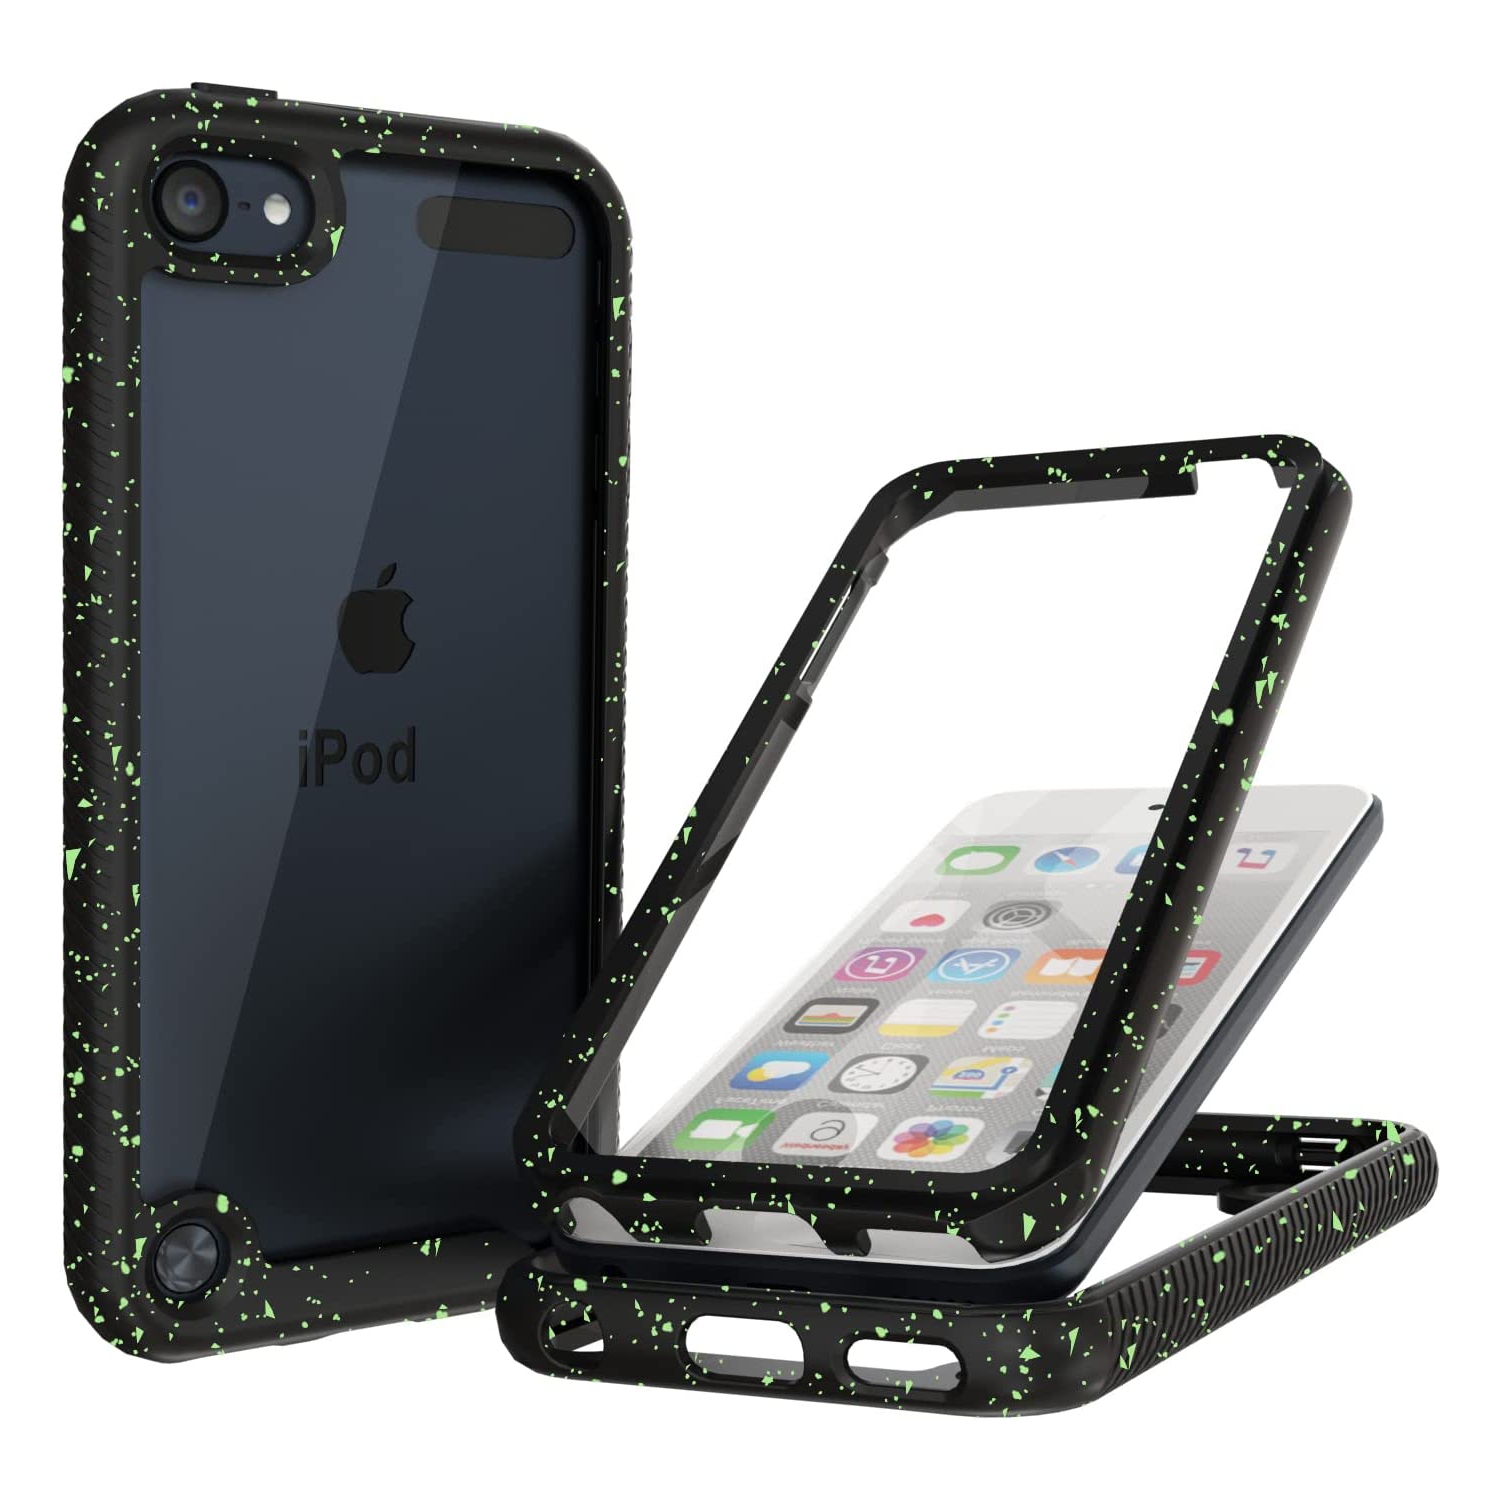 iPod Touch 7th Generation Case,iPod Touch 7 Case with Built-in Screen Protector and Splash Color Dot Design,Shockproof Heavy Duty Full Protective Case for iPod Touch 5/6/7th Gene